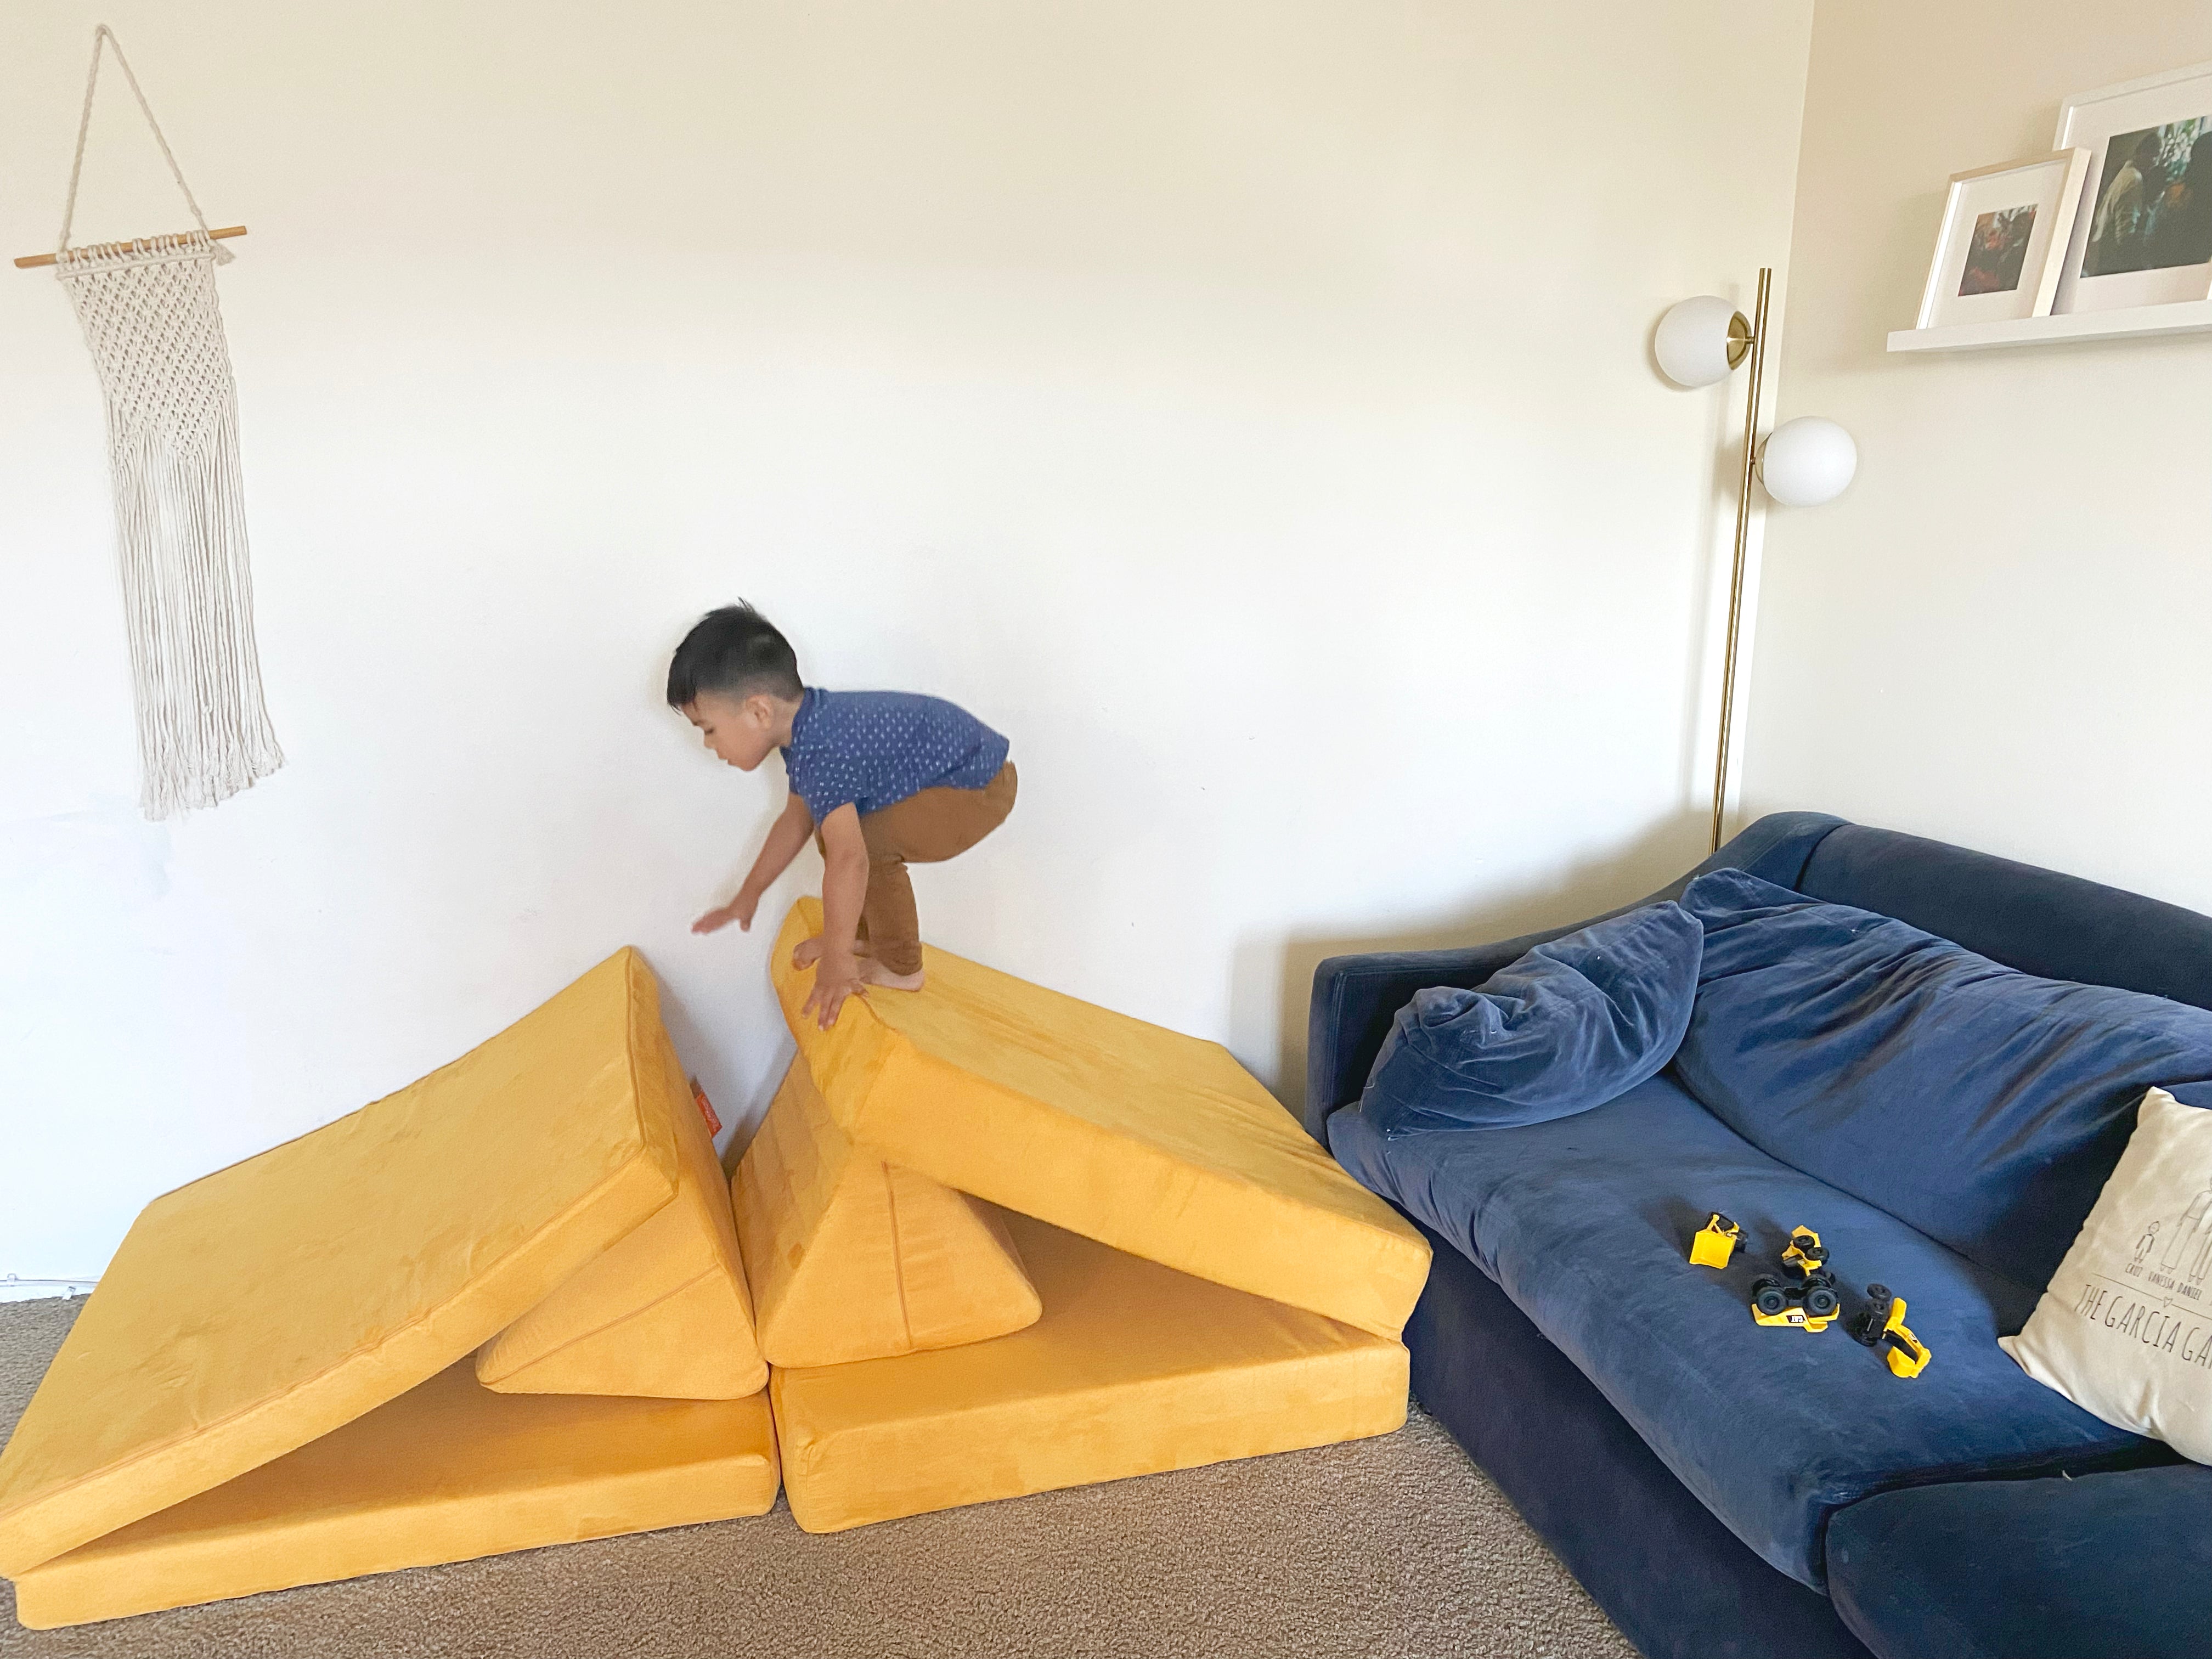 Child crouching in preparation of jumping between two cushion/pillow ramps